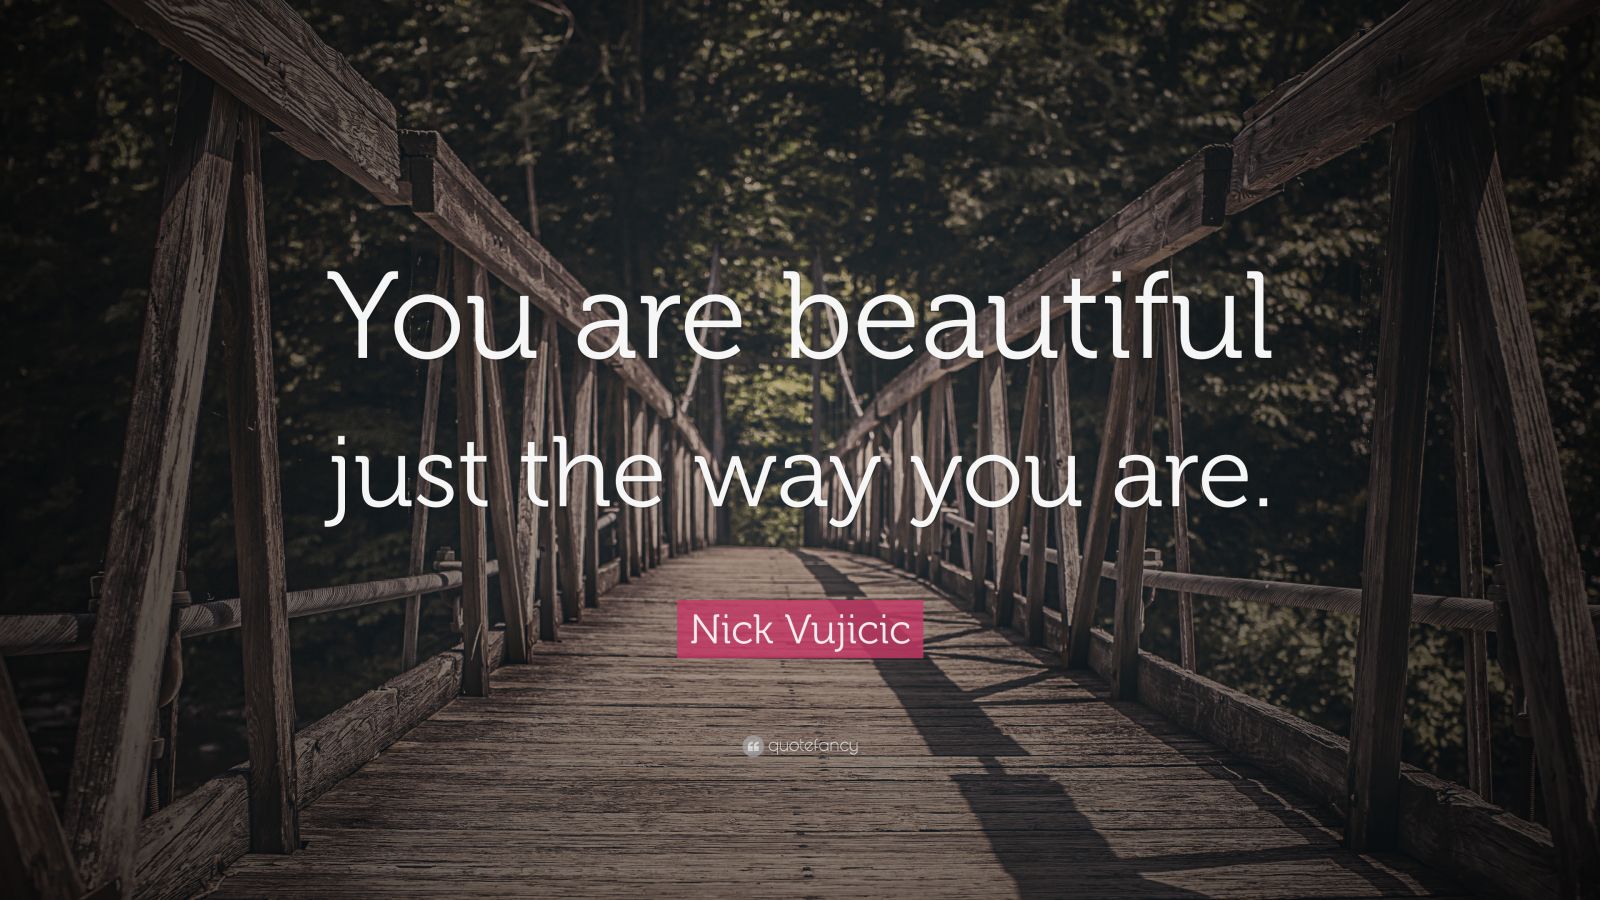 Nick Vujicic Quote “You are beautiful just the way you